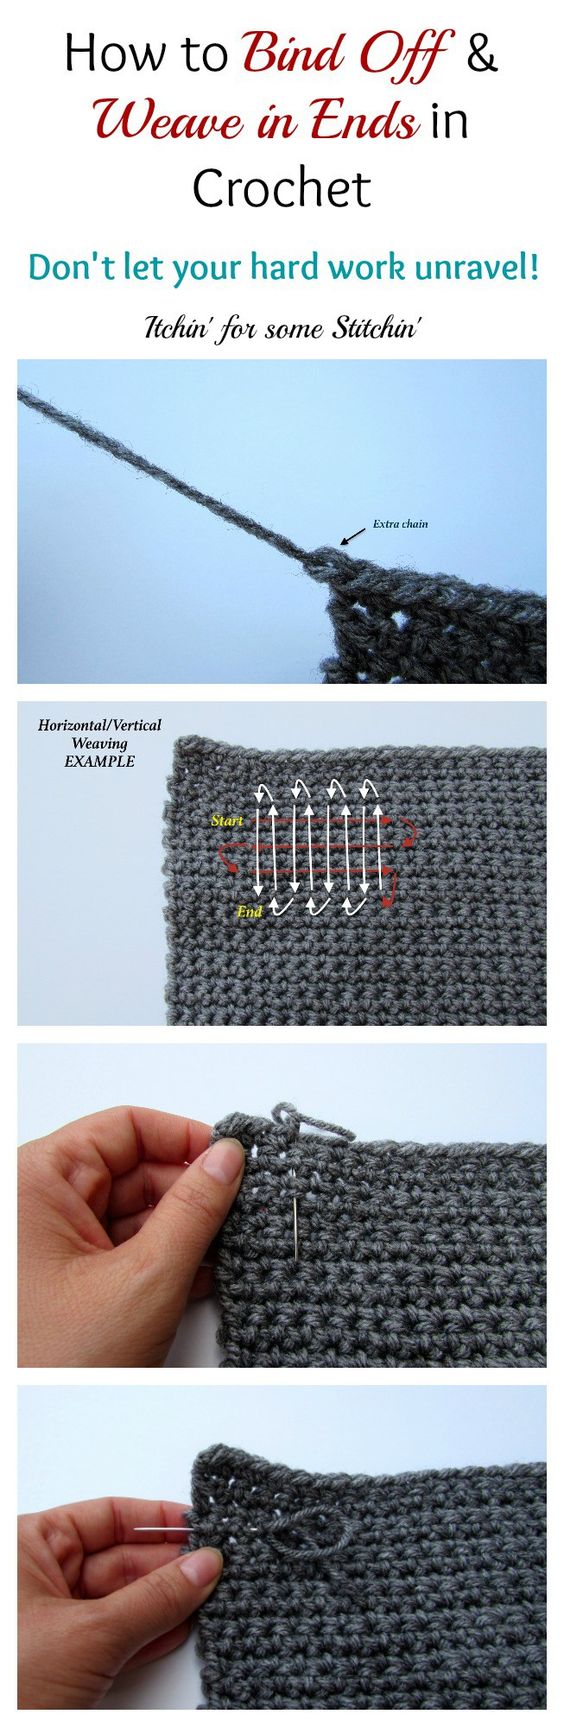 How to Bind Off and Weave in Ends in Crochet. 